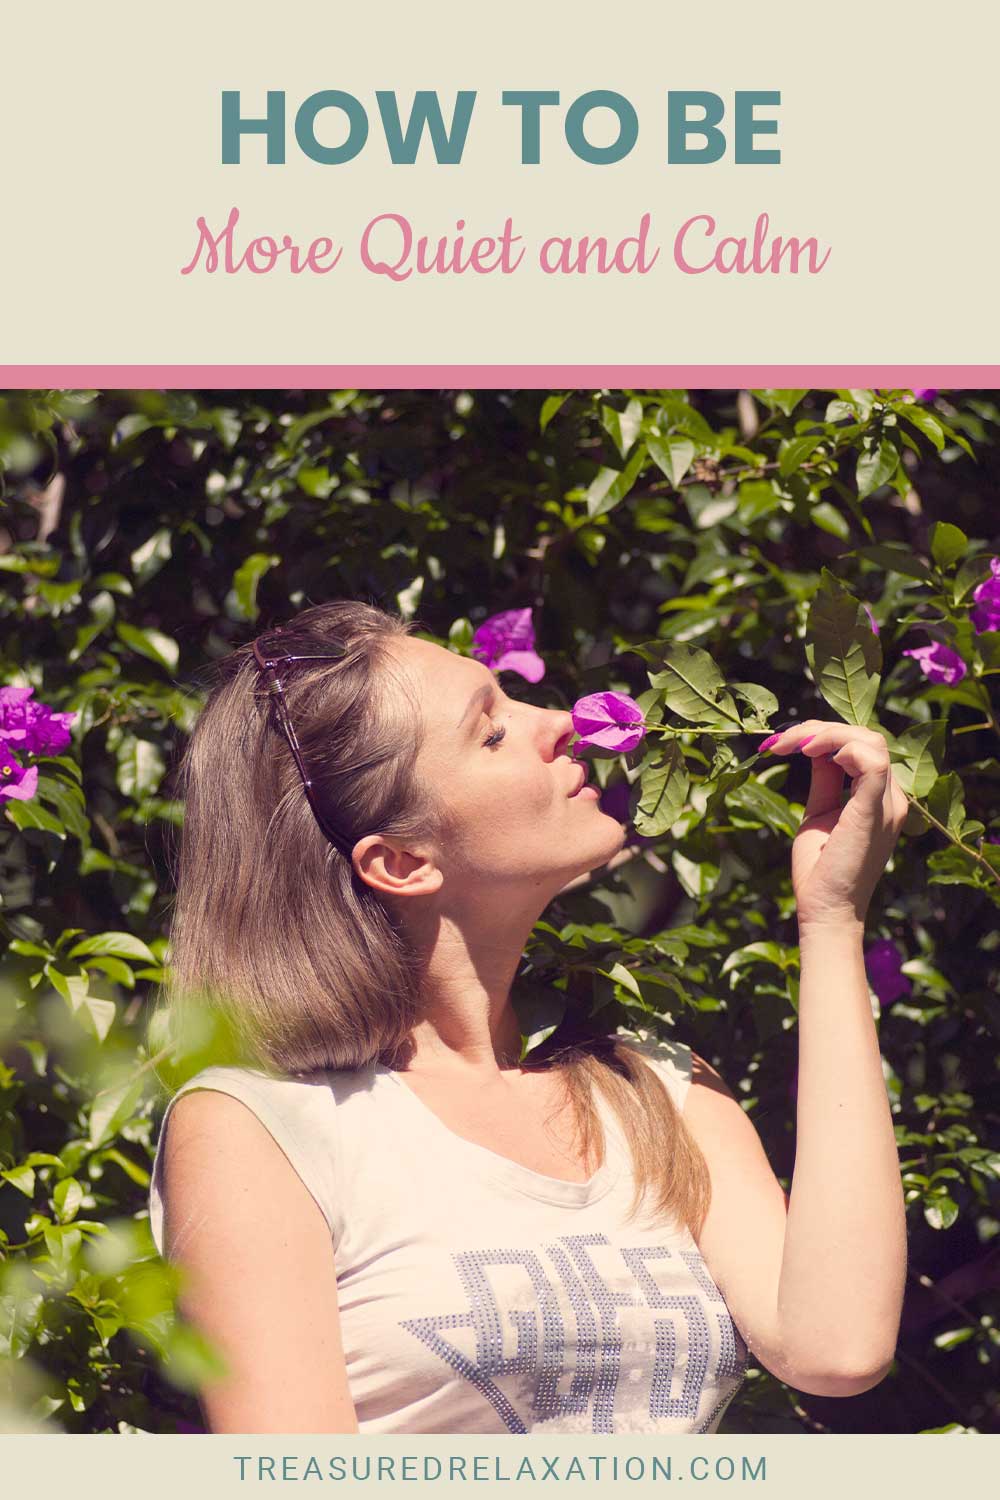 Woman smelling a flower on a tree - How To Be More Quiet and Calm